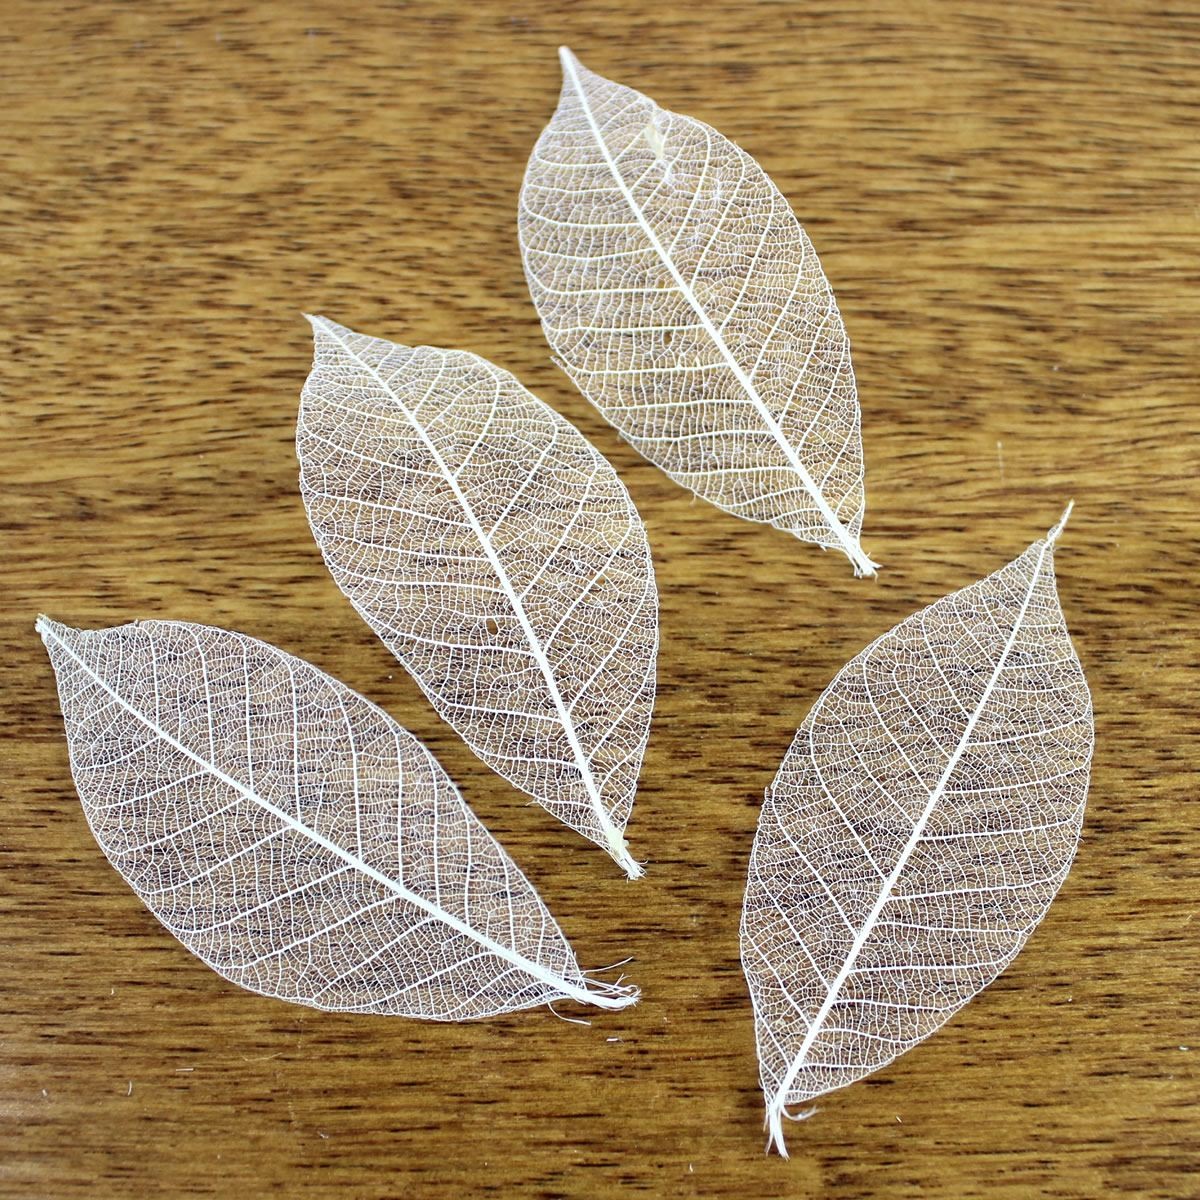  dry large ground agriculture . Mini skeleton leaf small approximately 40 sheets white 51493-011 dry leaf thing leaf 